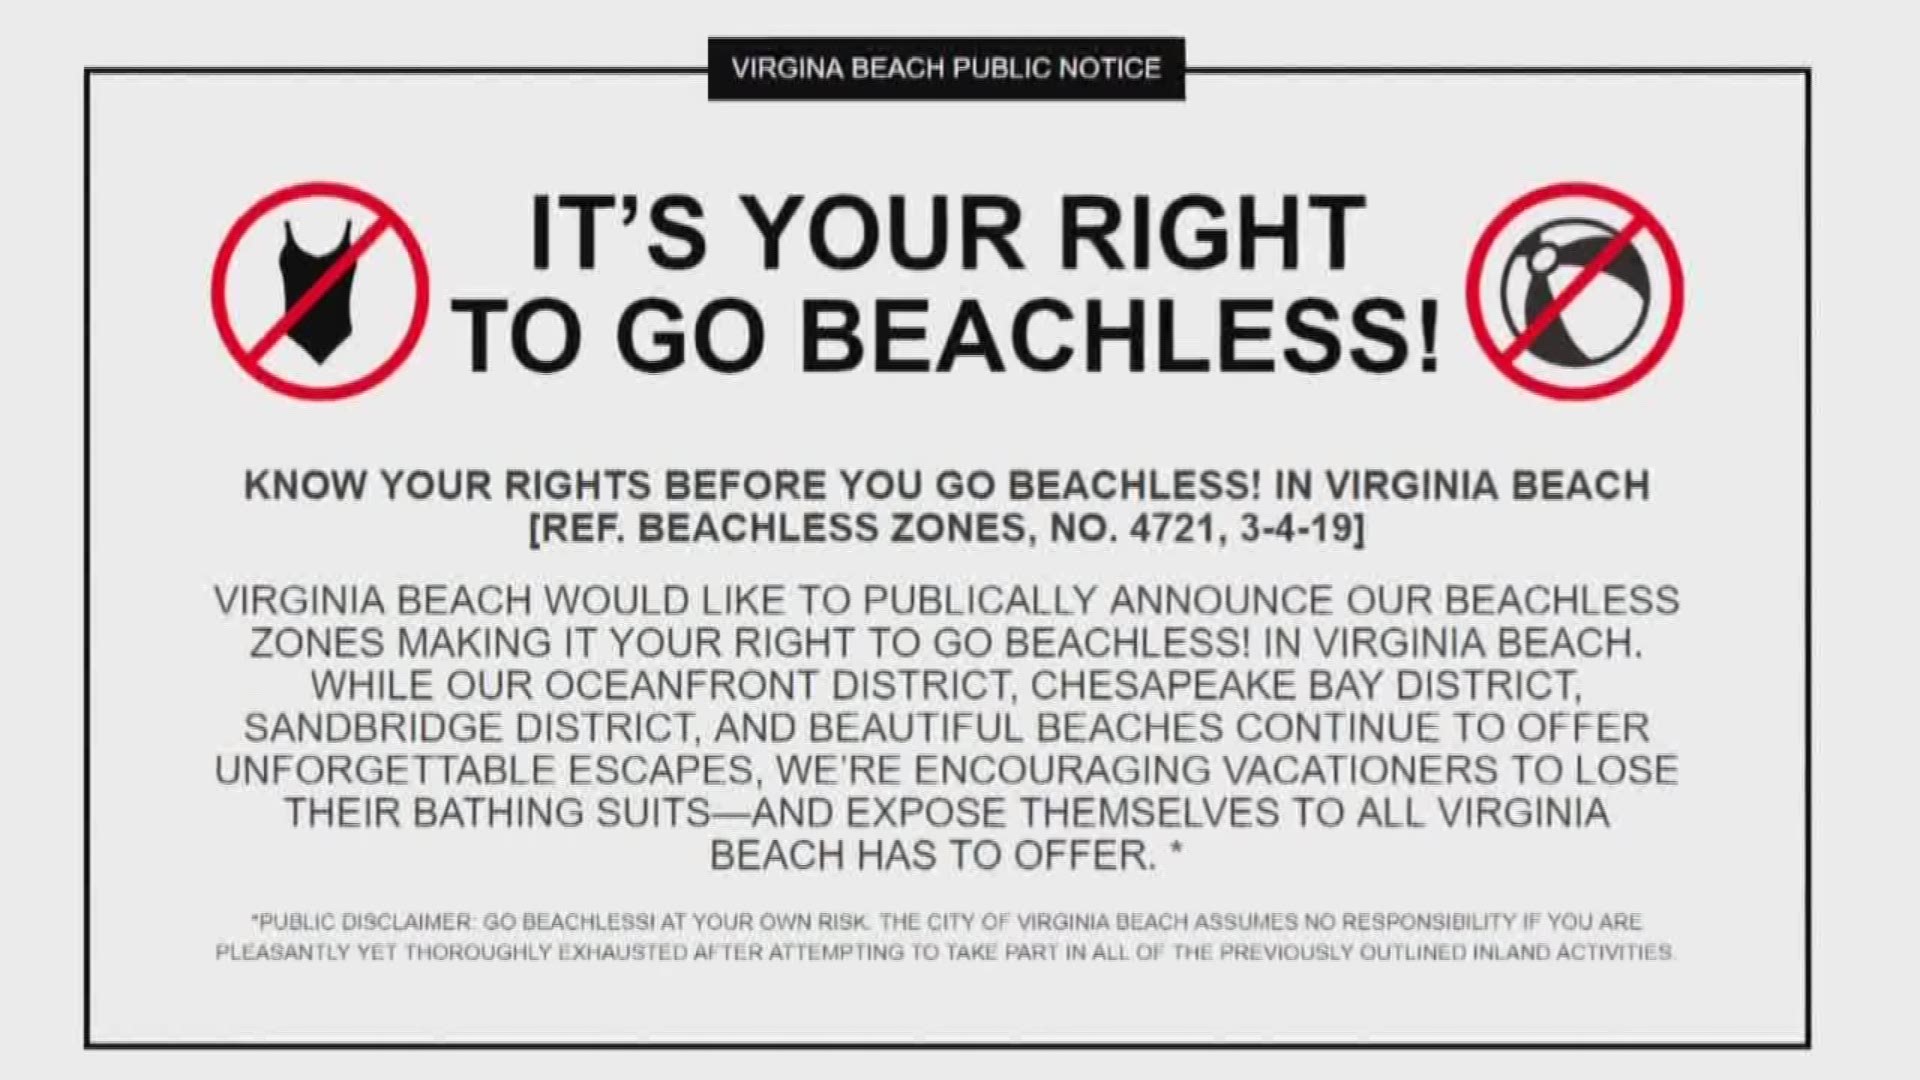 Some Virginia Beach residents think the city missed the mark with its "Go Beachless" campaign, but others think it may be good for tourism.